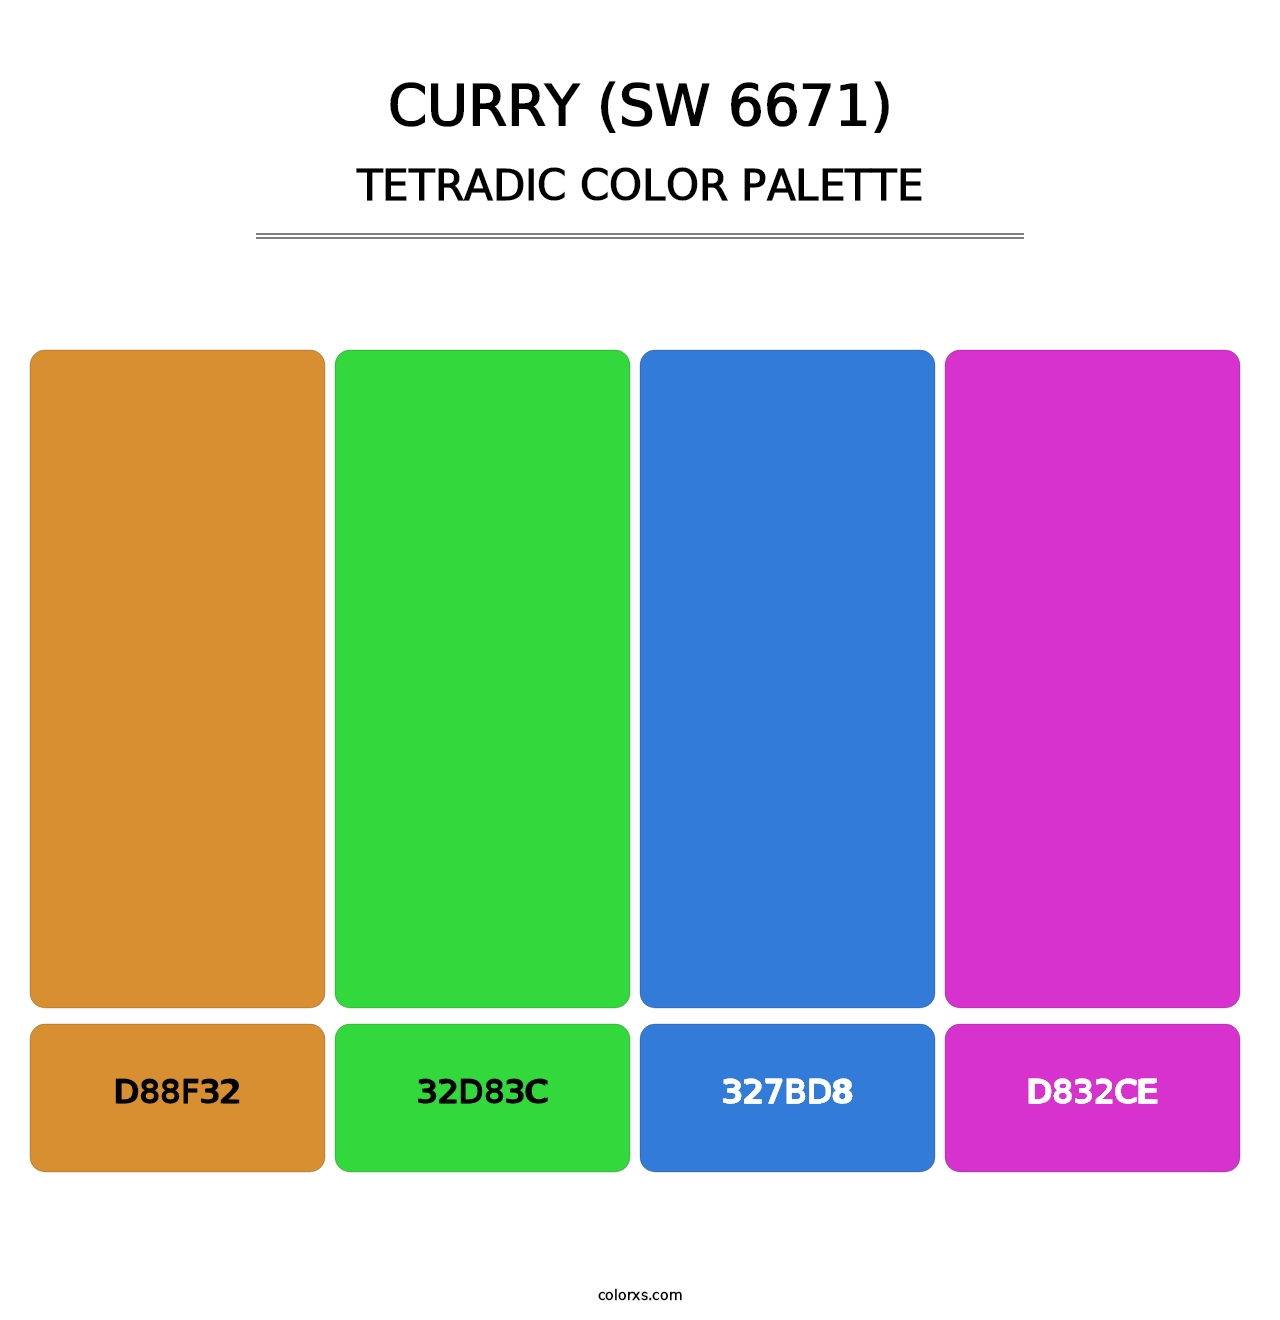 Curry (SW 6671) - Tetradic Color Palette